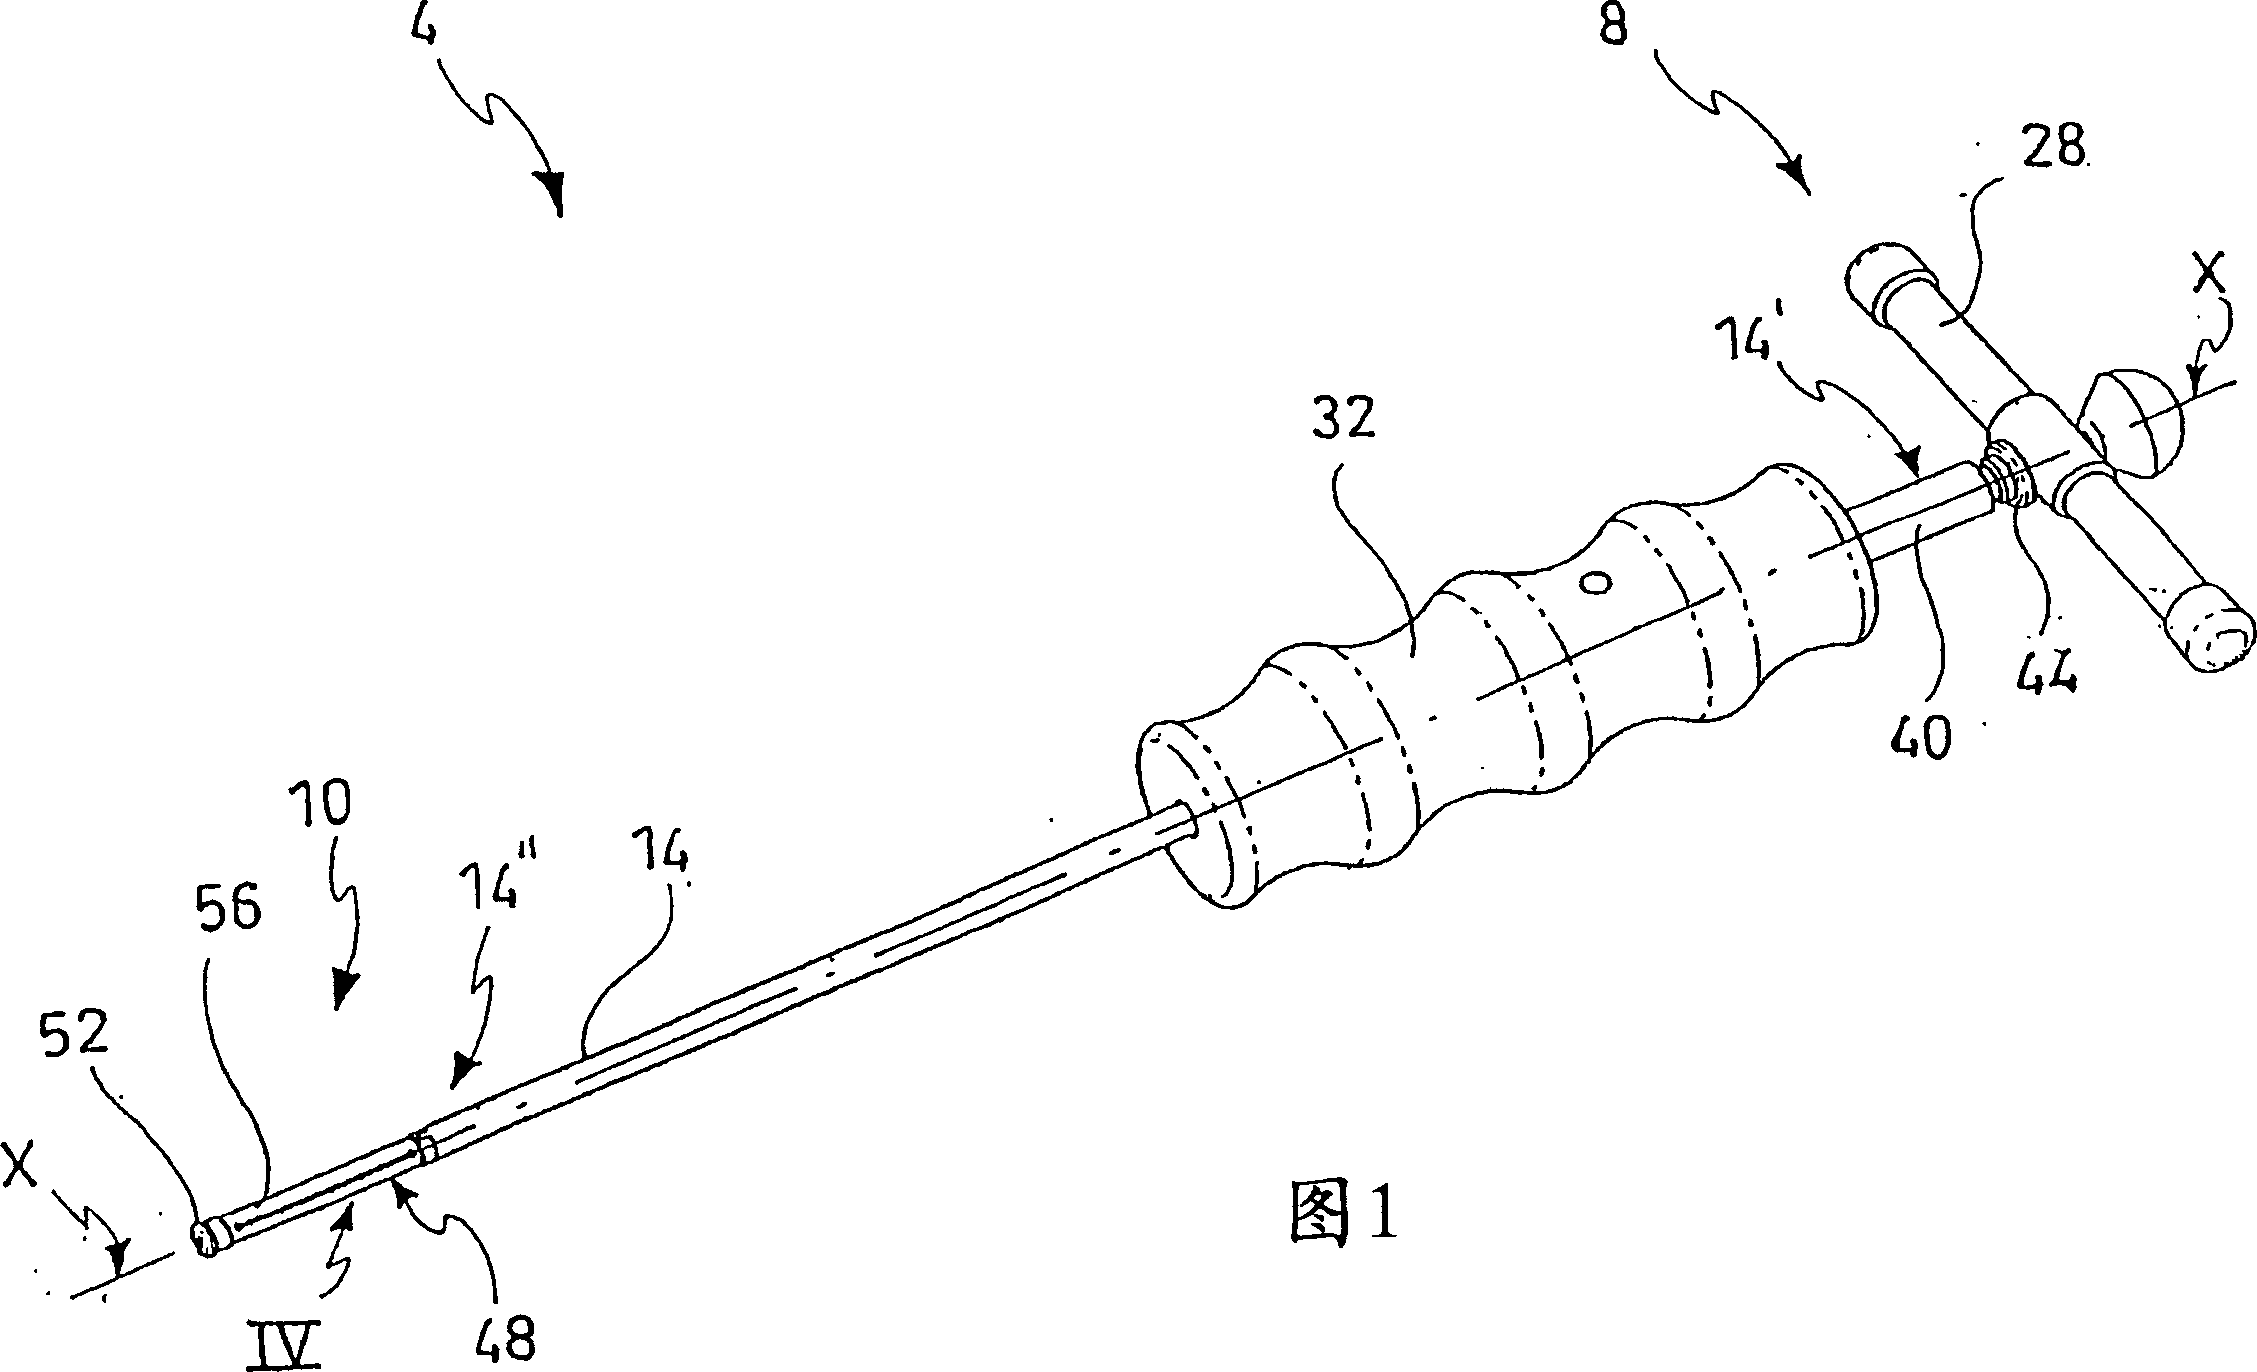 Intravertebral widening device, injection device, and kit and method for kyphoplasty